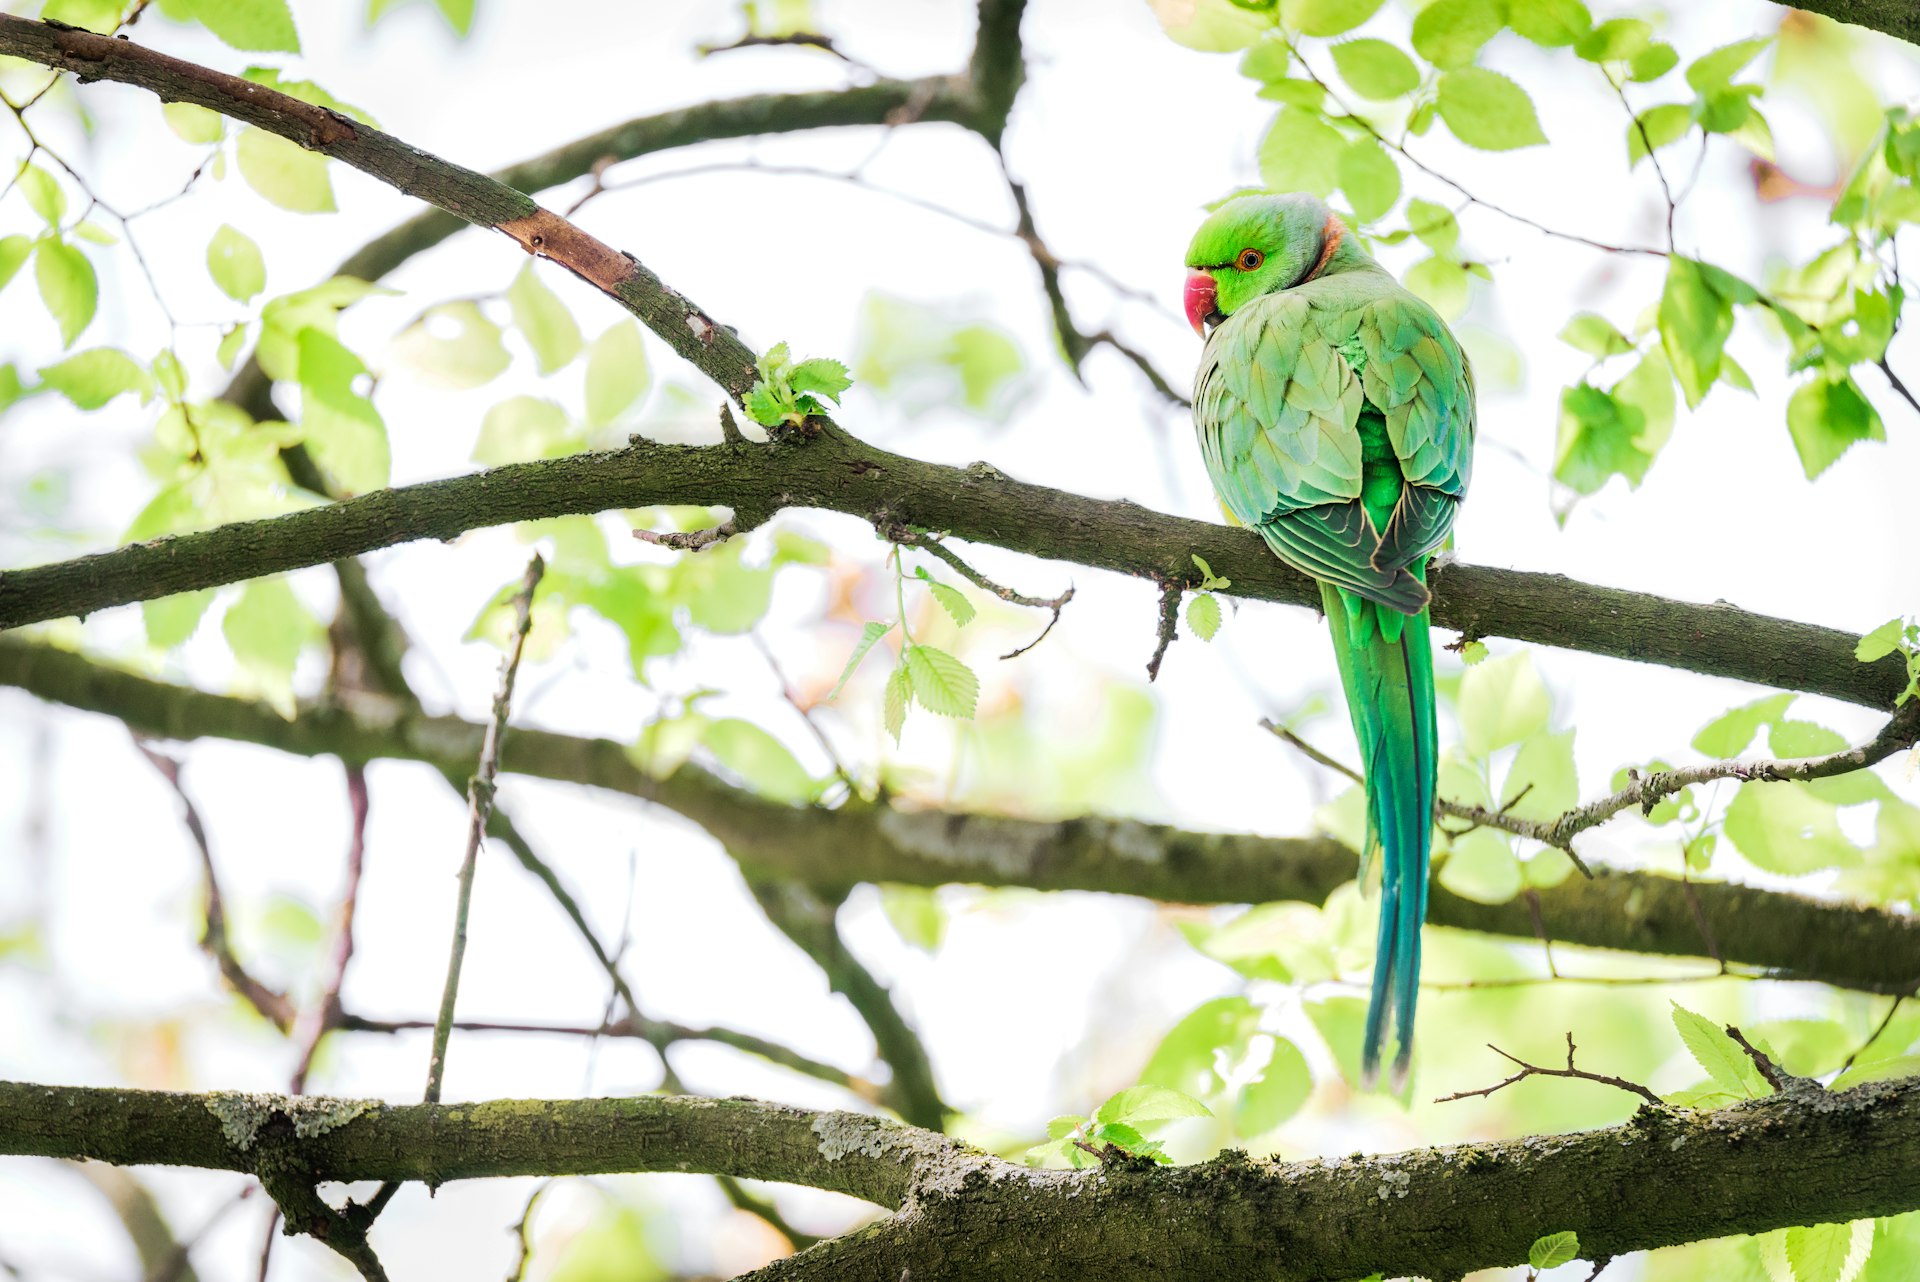 A green parakeet with a red beak sat on a branch in a tree